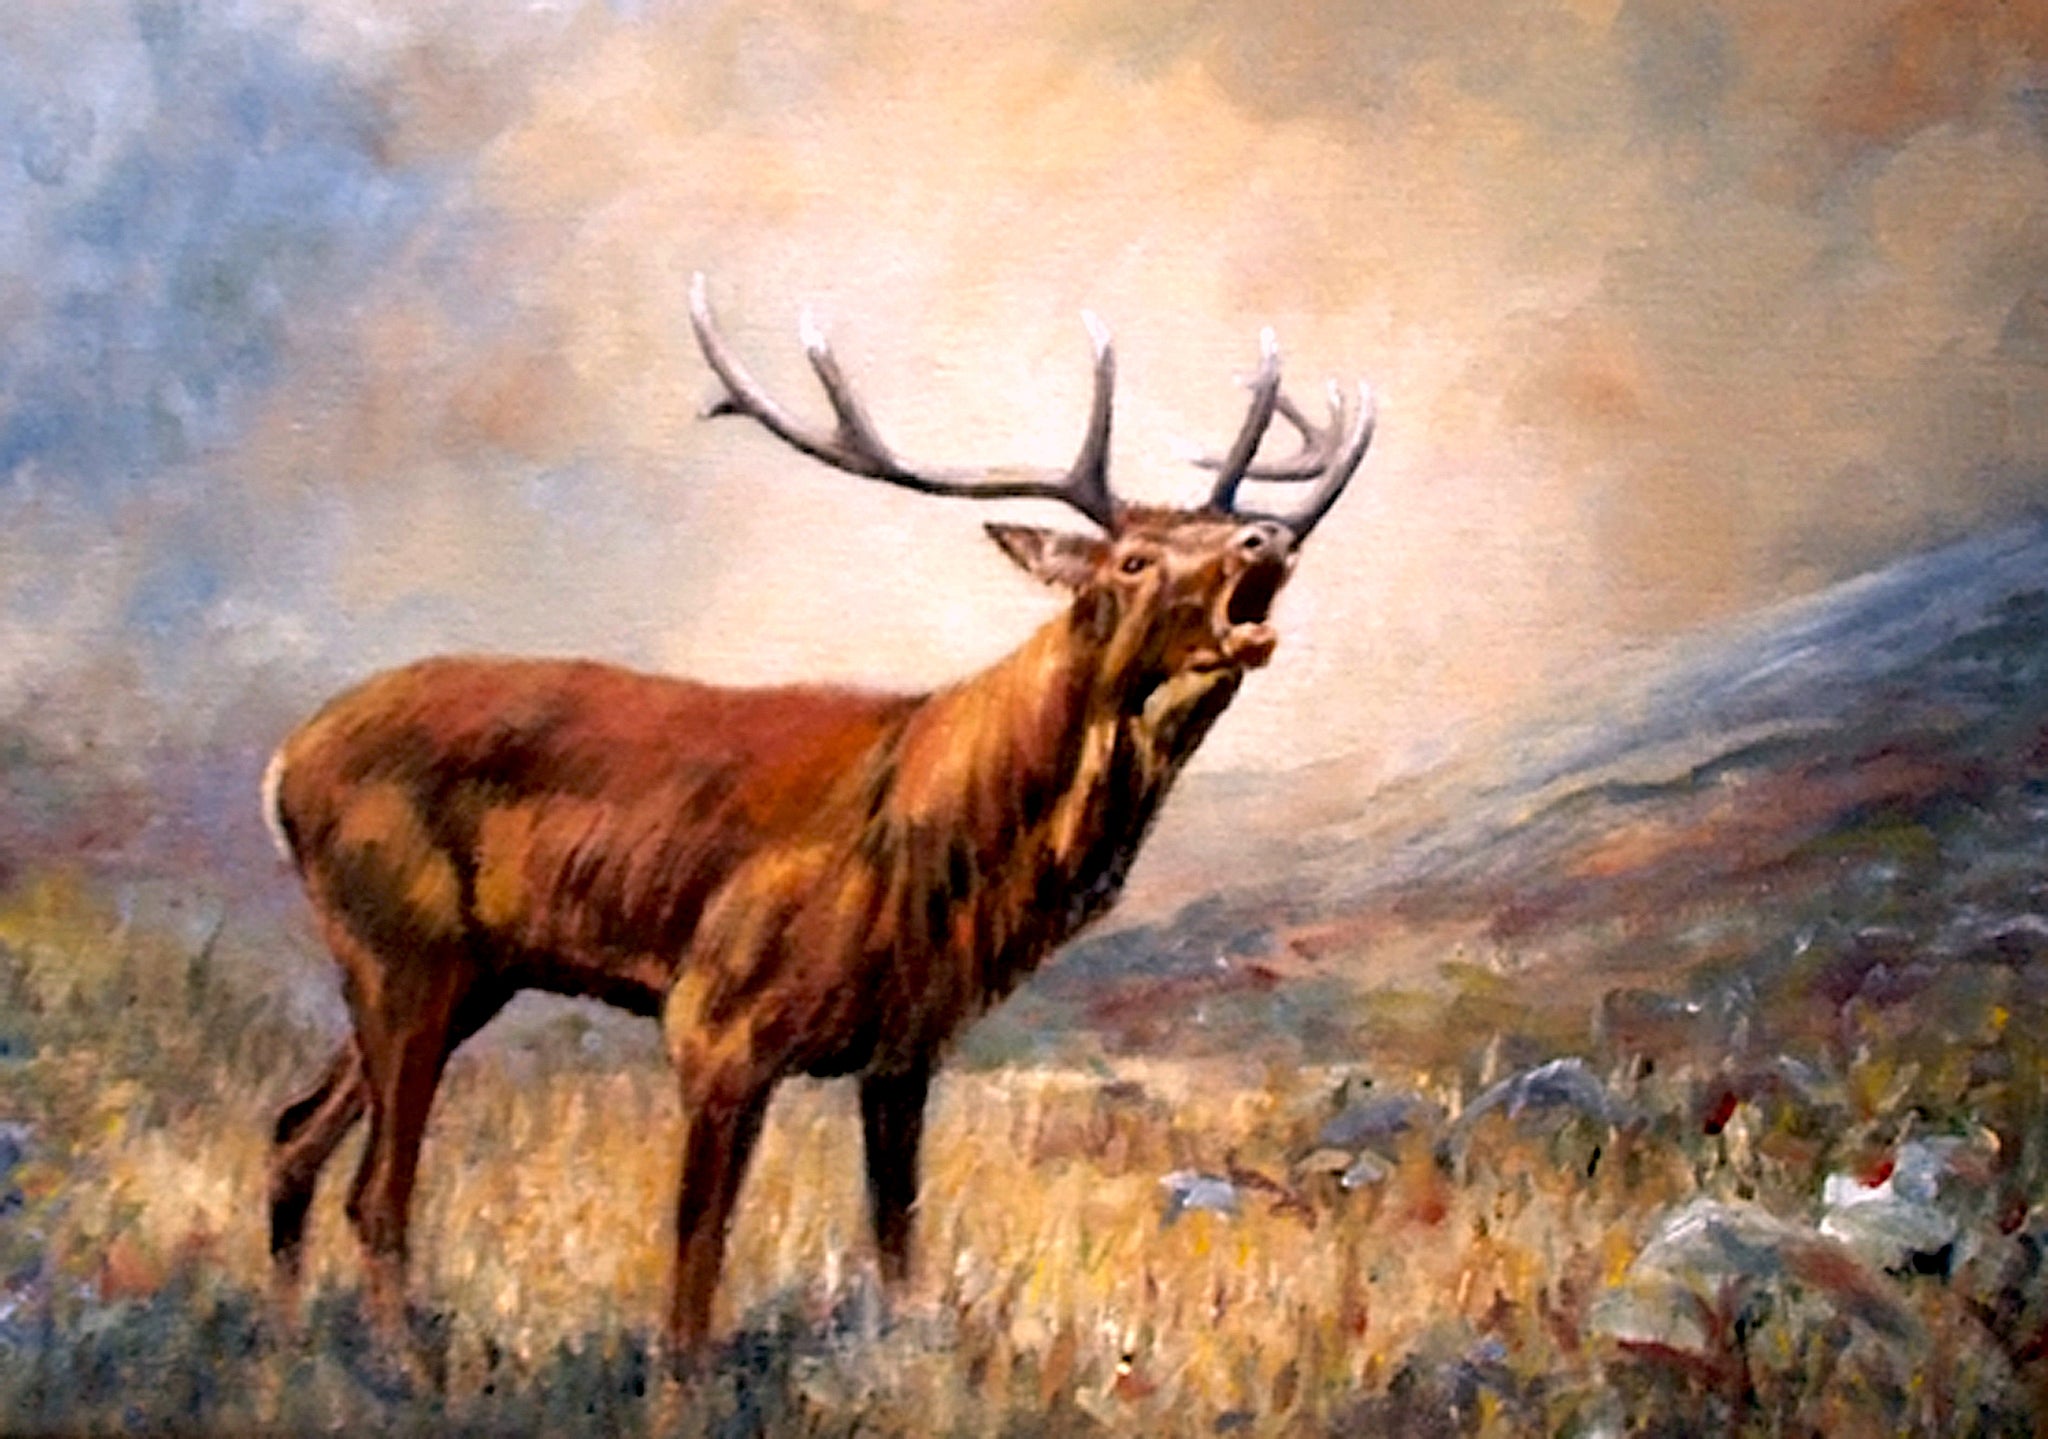 A6 mounted print of a roaring stag